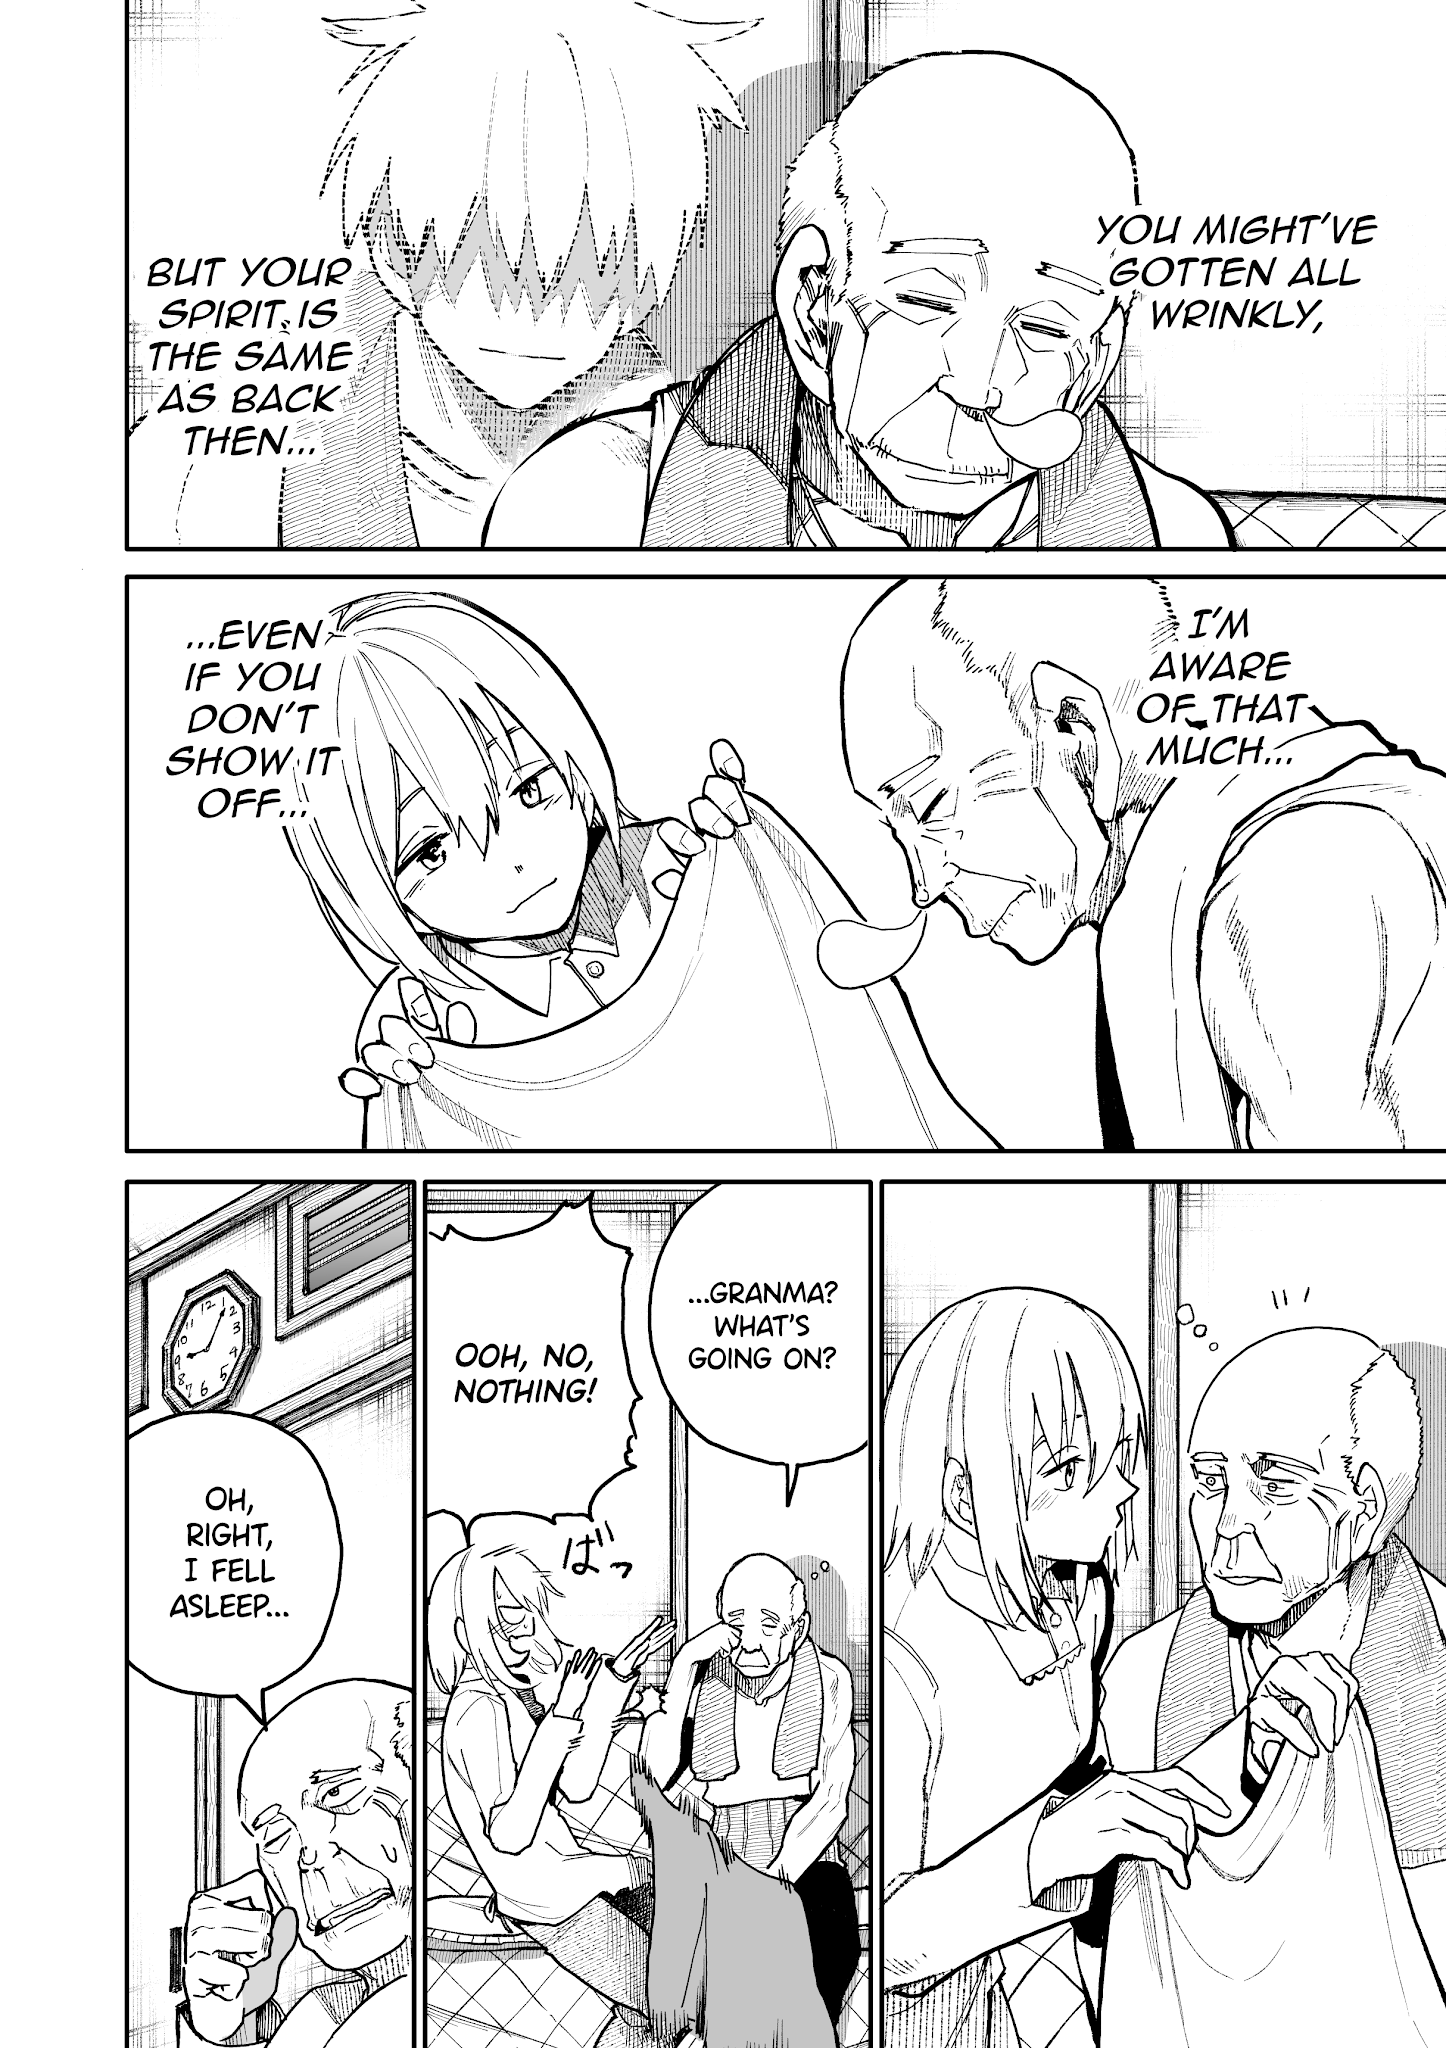 A Story About A Grampa And Granma Returned Back To Their Youth. - Page 2